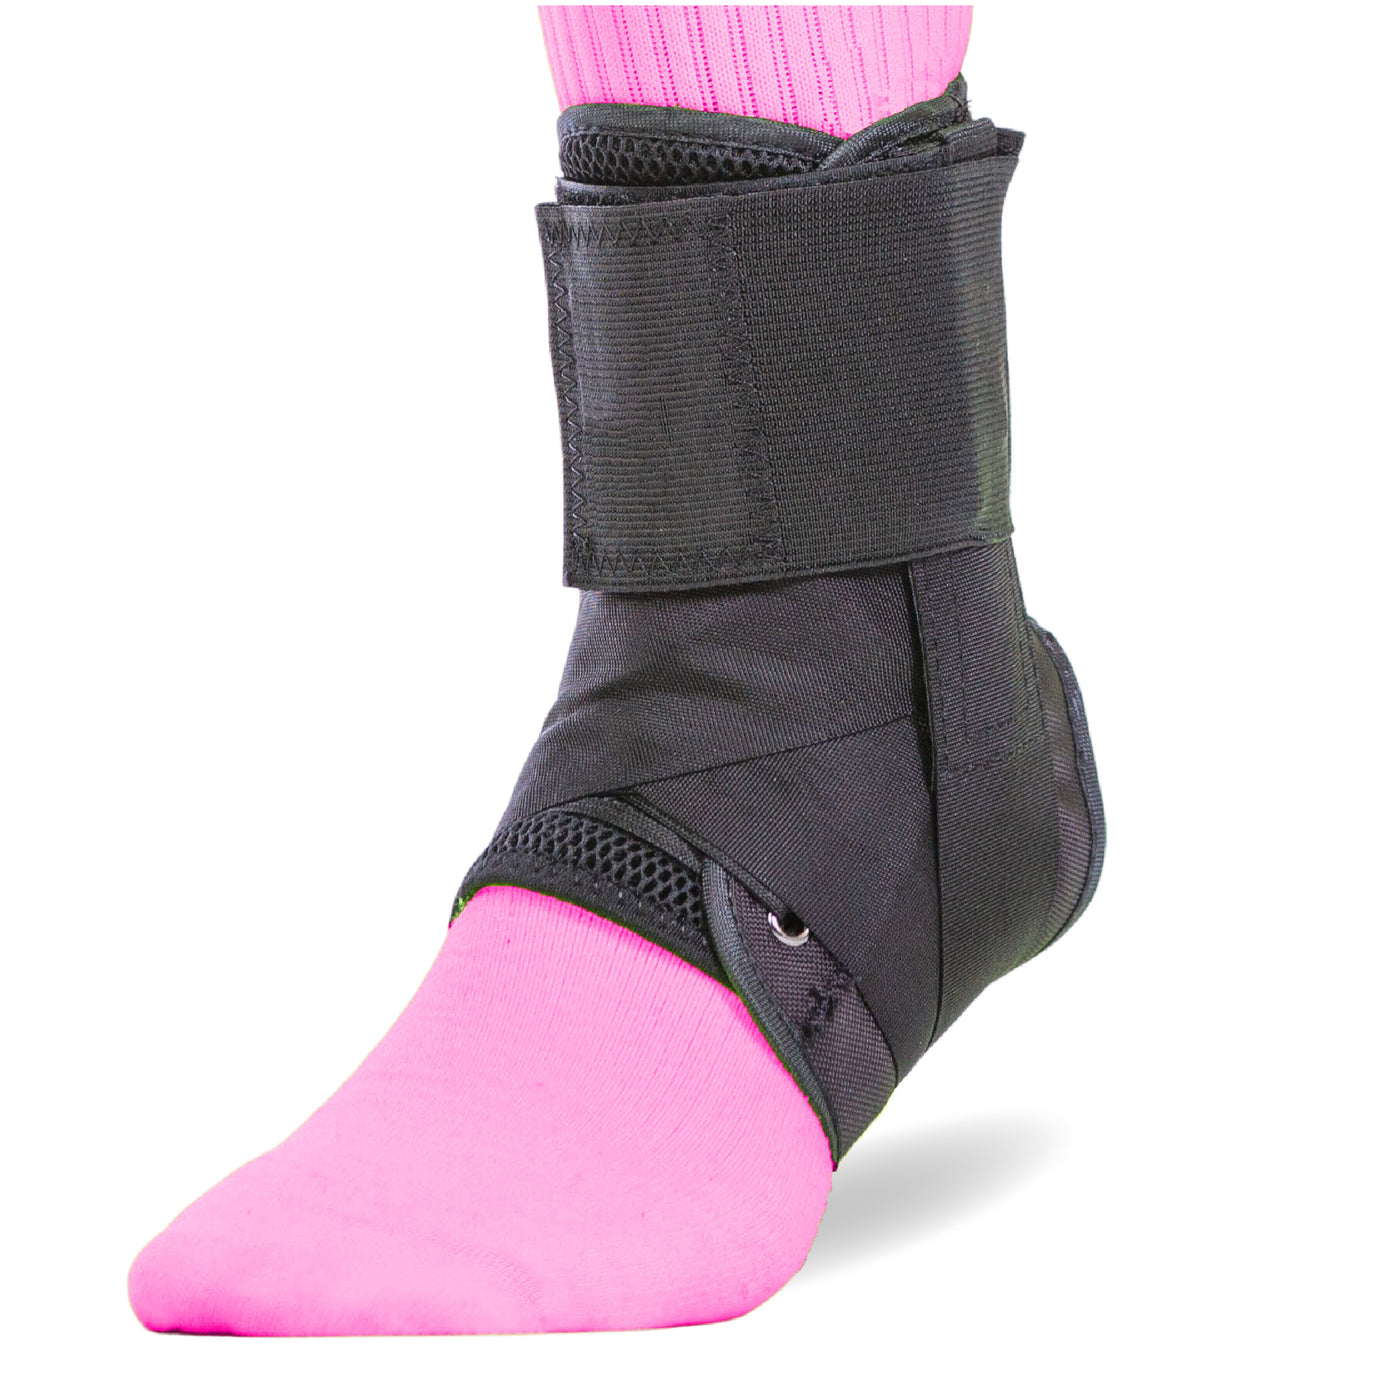 Wear a womens ankle brace to prevent rolled ankles during sports or around the house hide_on_site